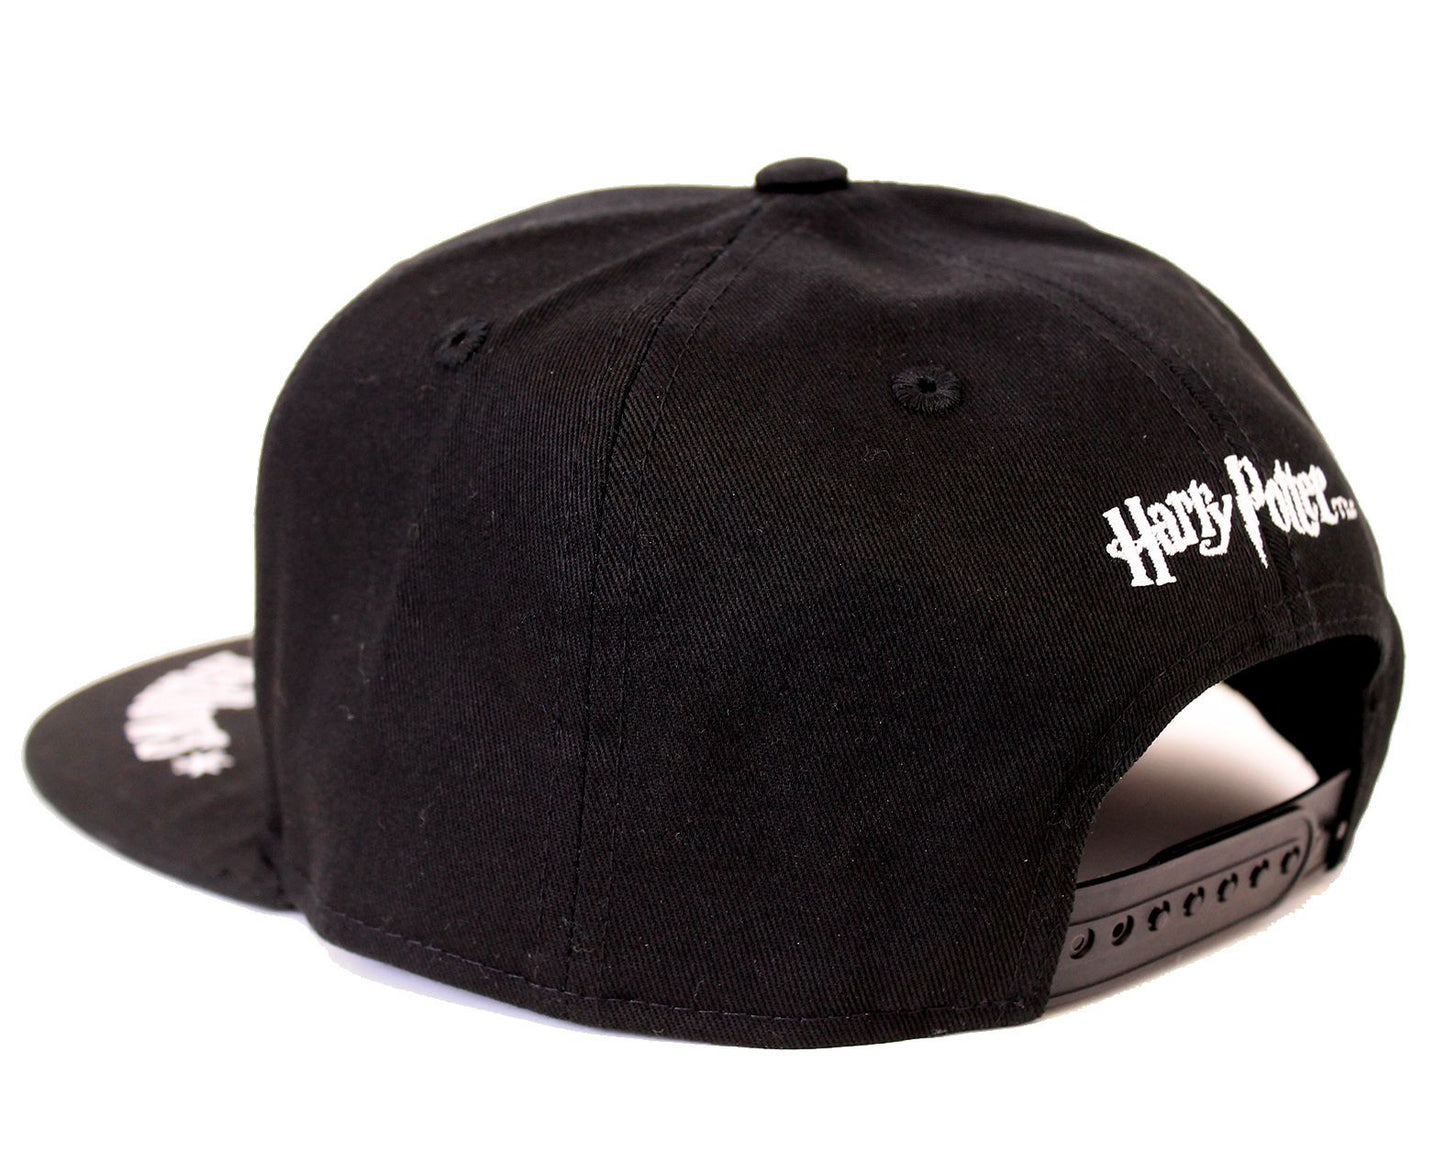 Casquette Harry Potter - The Deathly Hallows